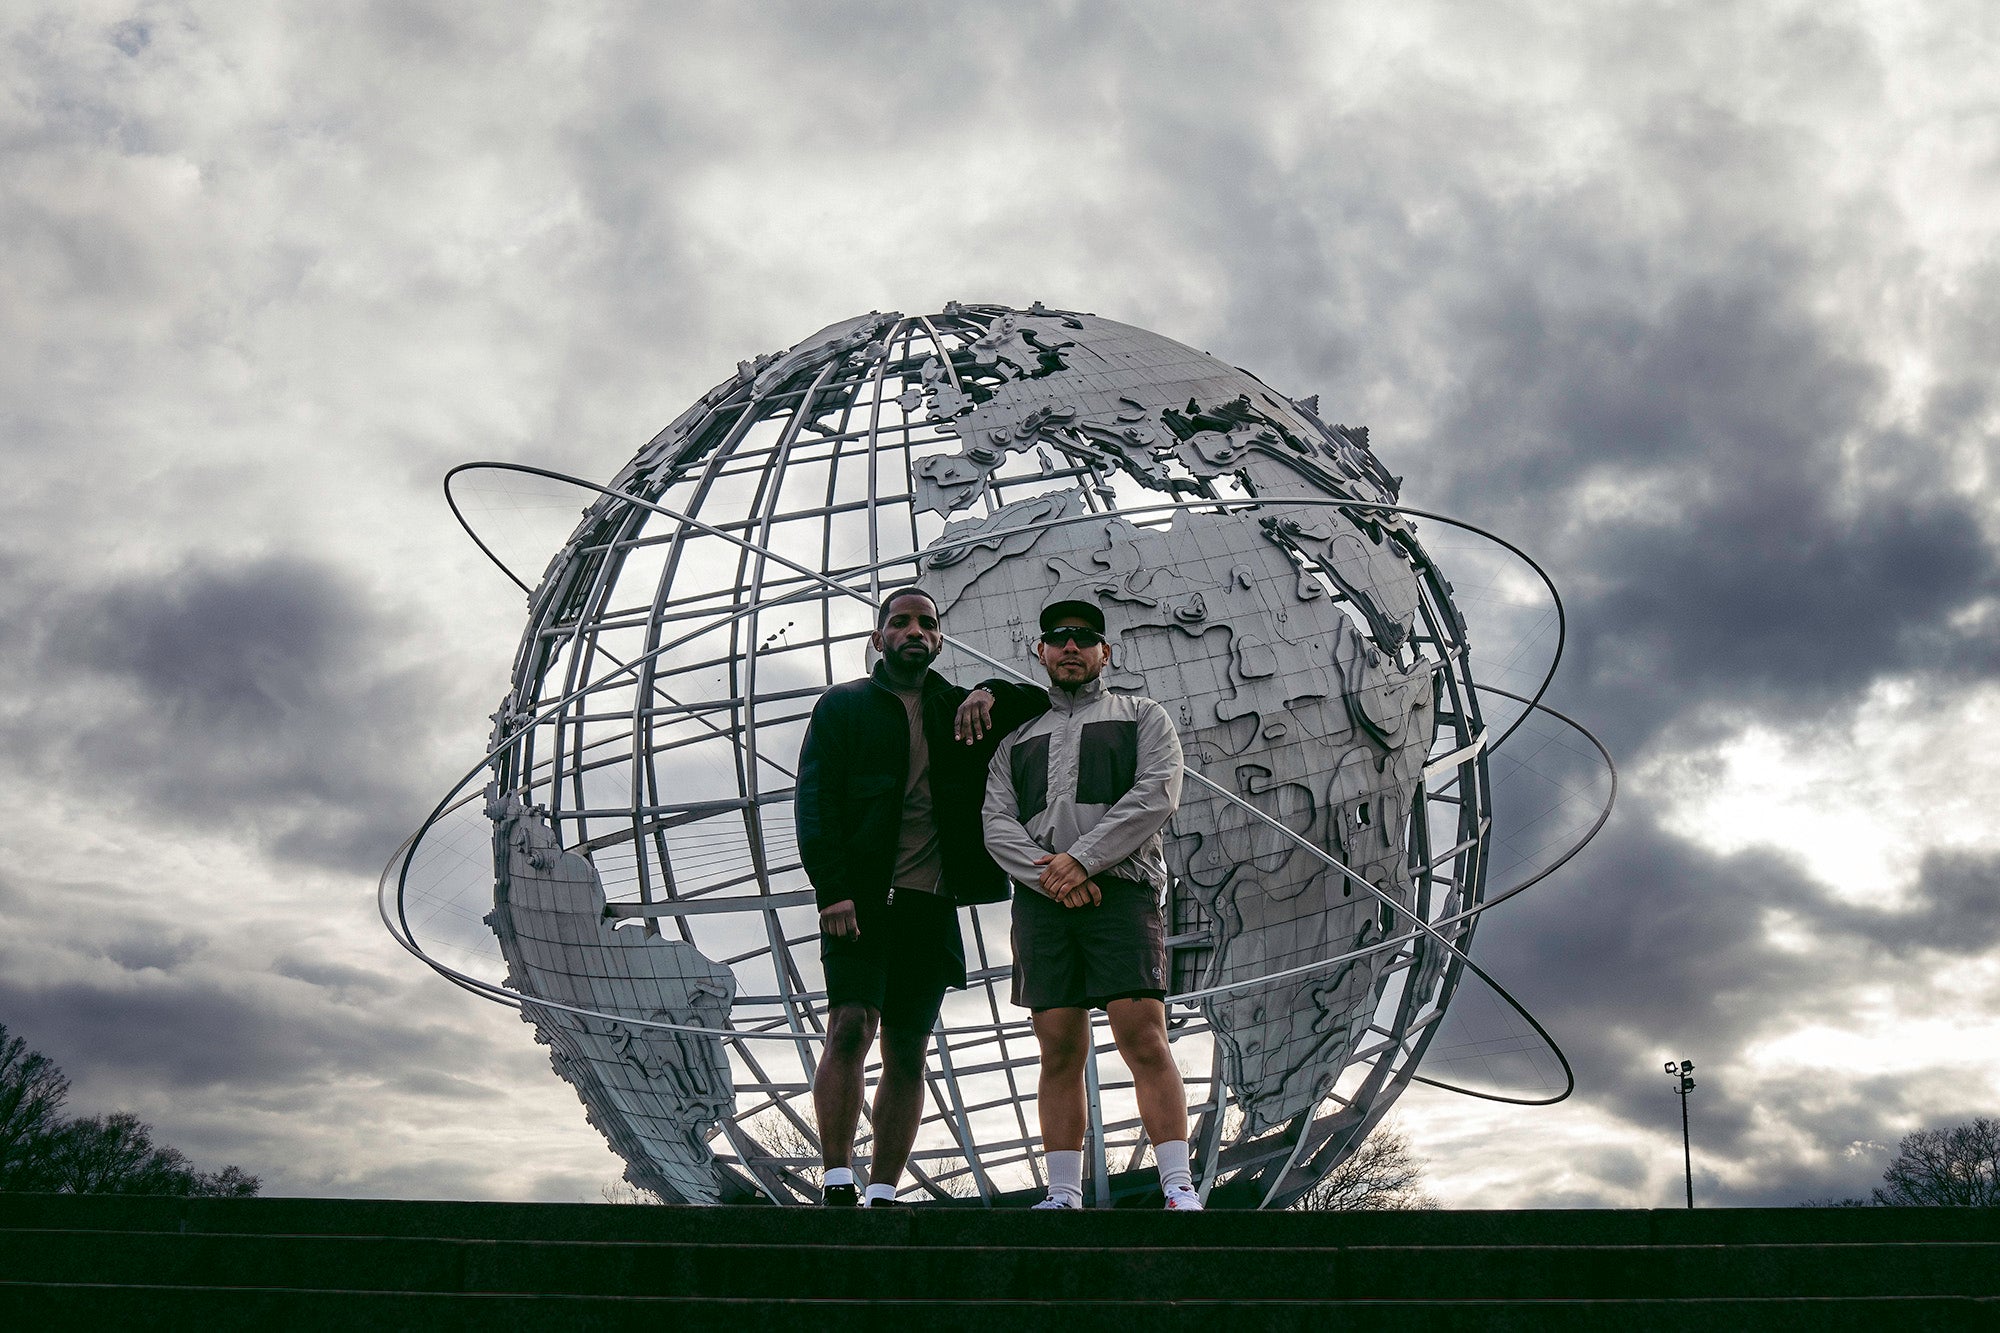 Two men pose by the unisphere in Flushing Meadows park.